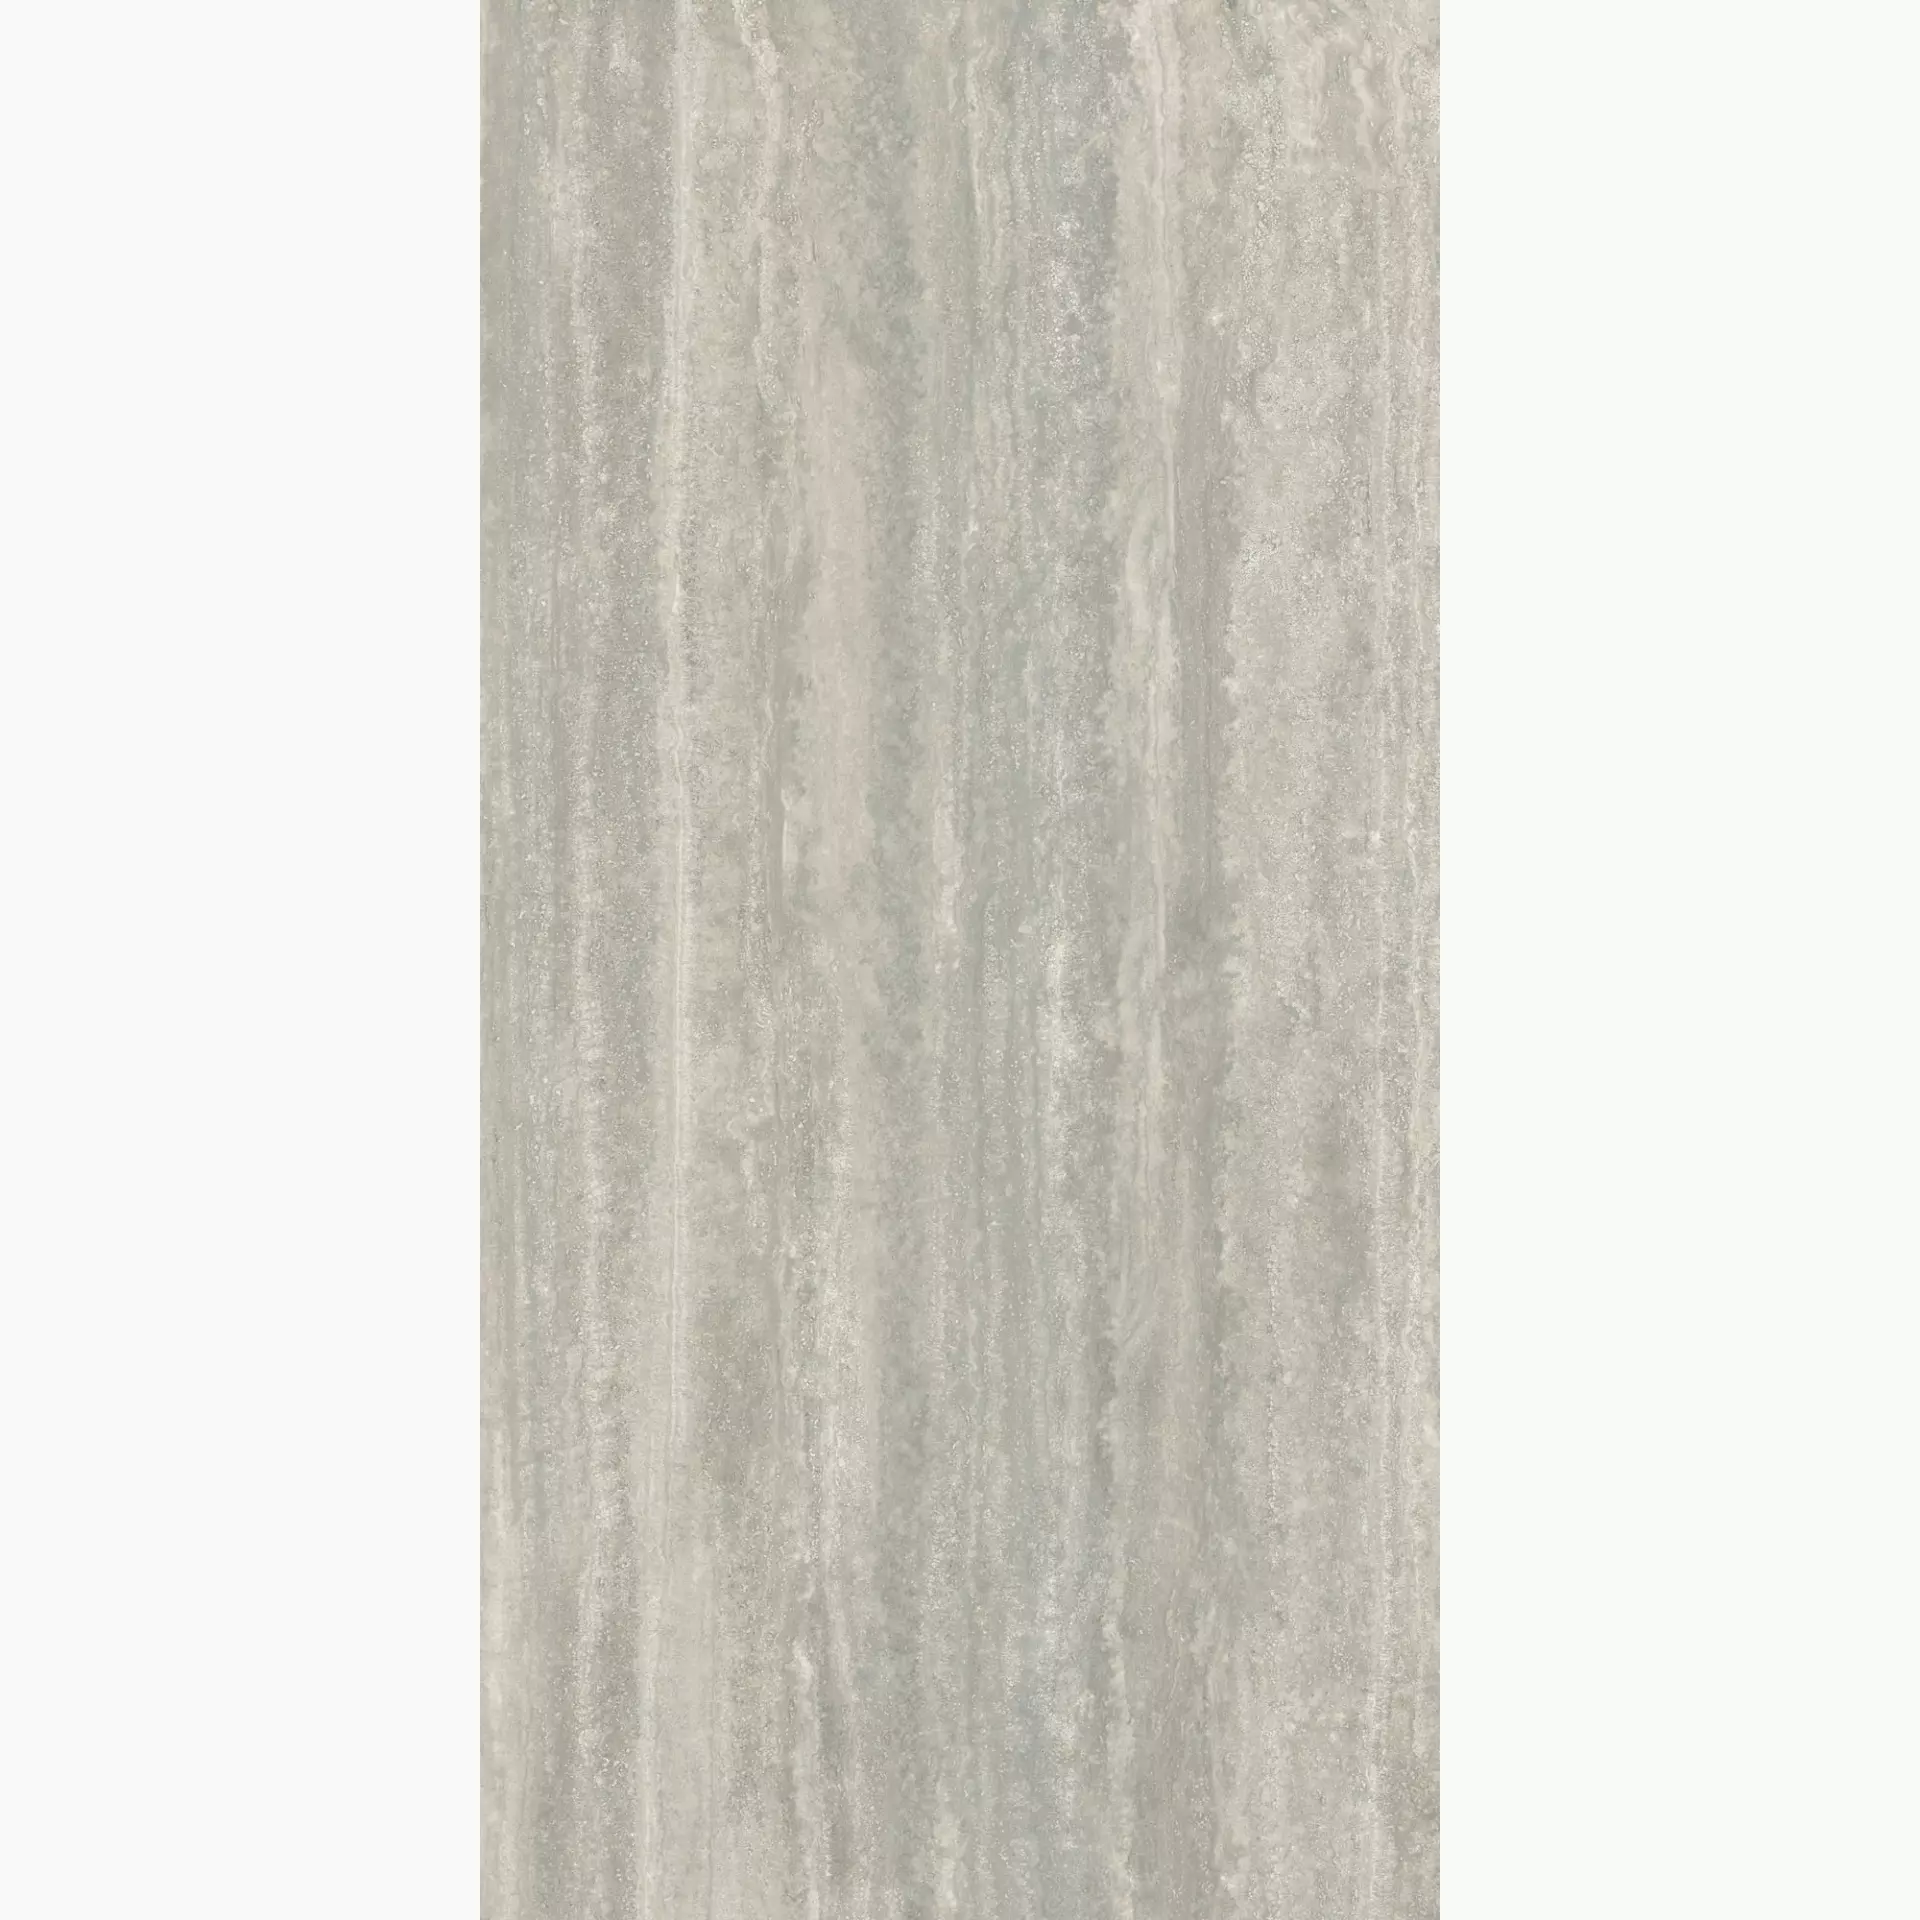 Caesar Iconica Verso Silver Grip AGRW 60x120cm rectified 20mm